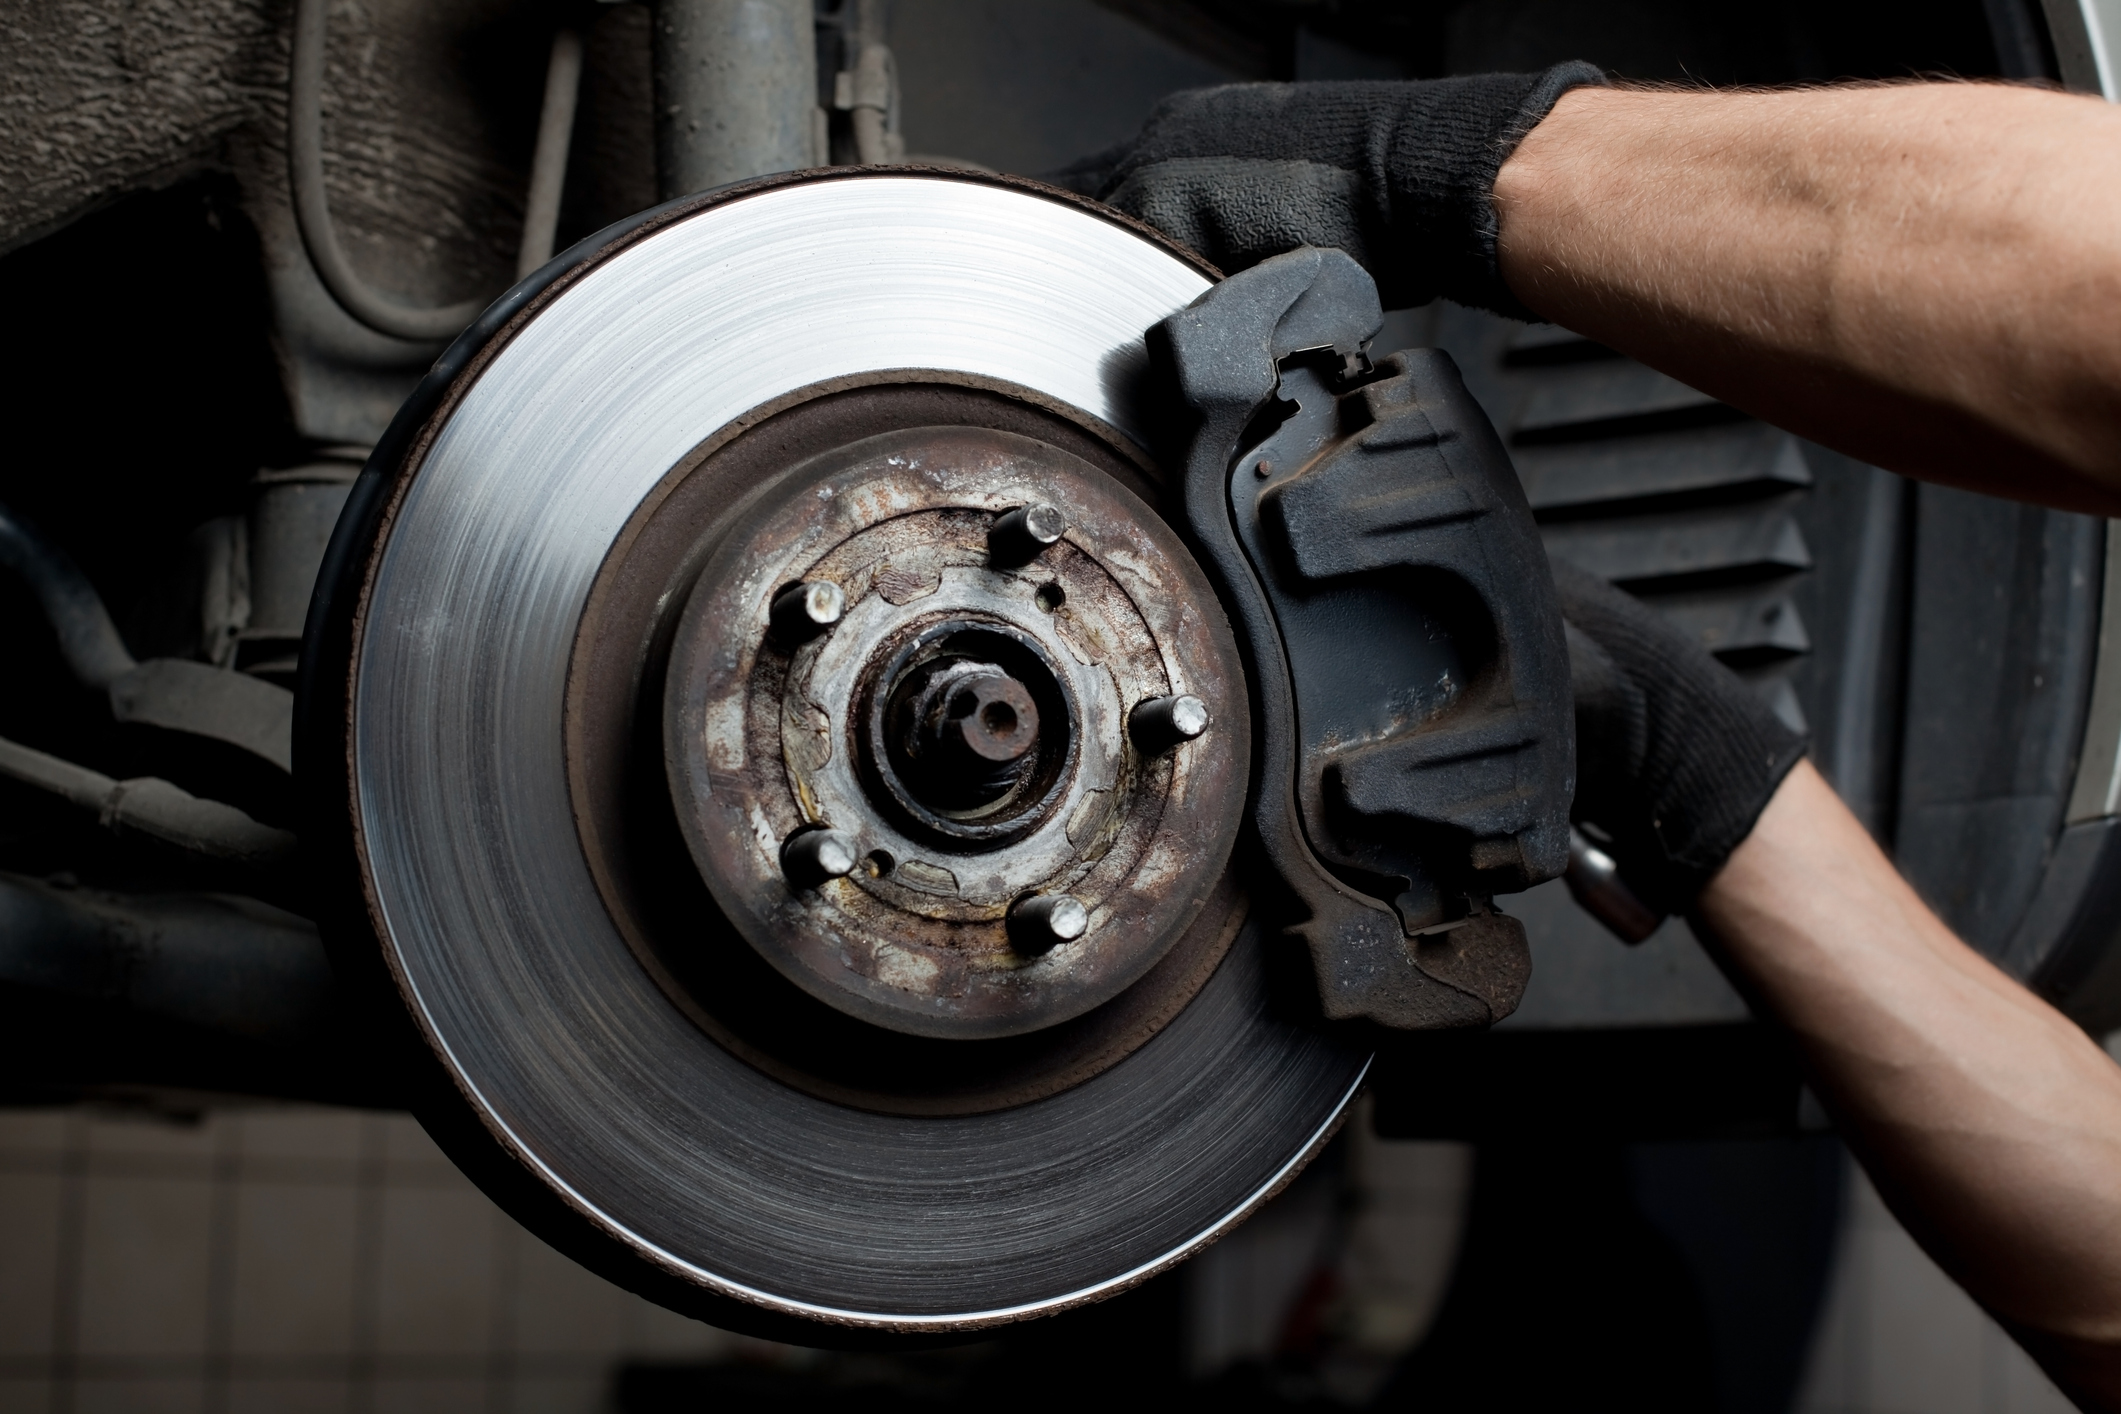 If your vehicles brakes are starting to fail or are showing signs of wear and tear, you should visit Scheller Automotive.